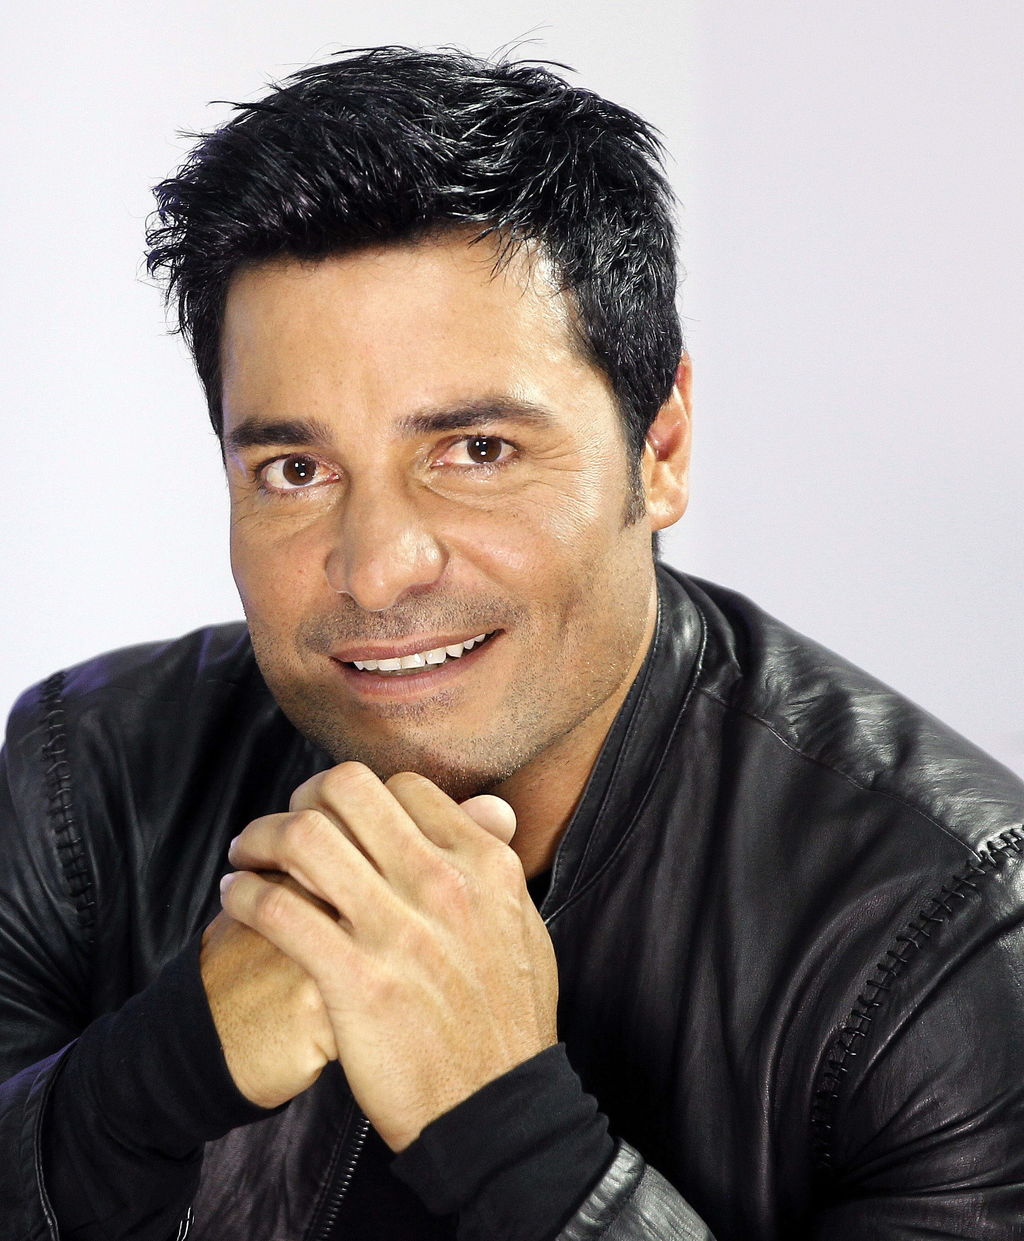 Free #chayanne Full HD Wallpaper images.